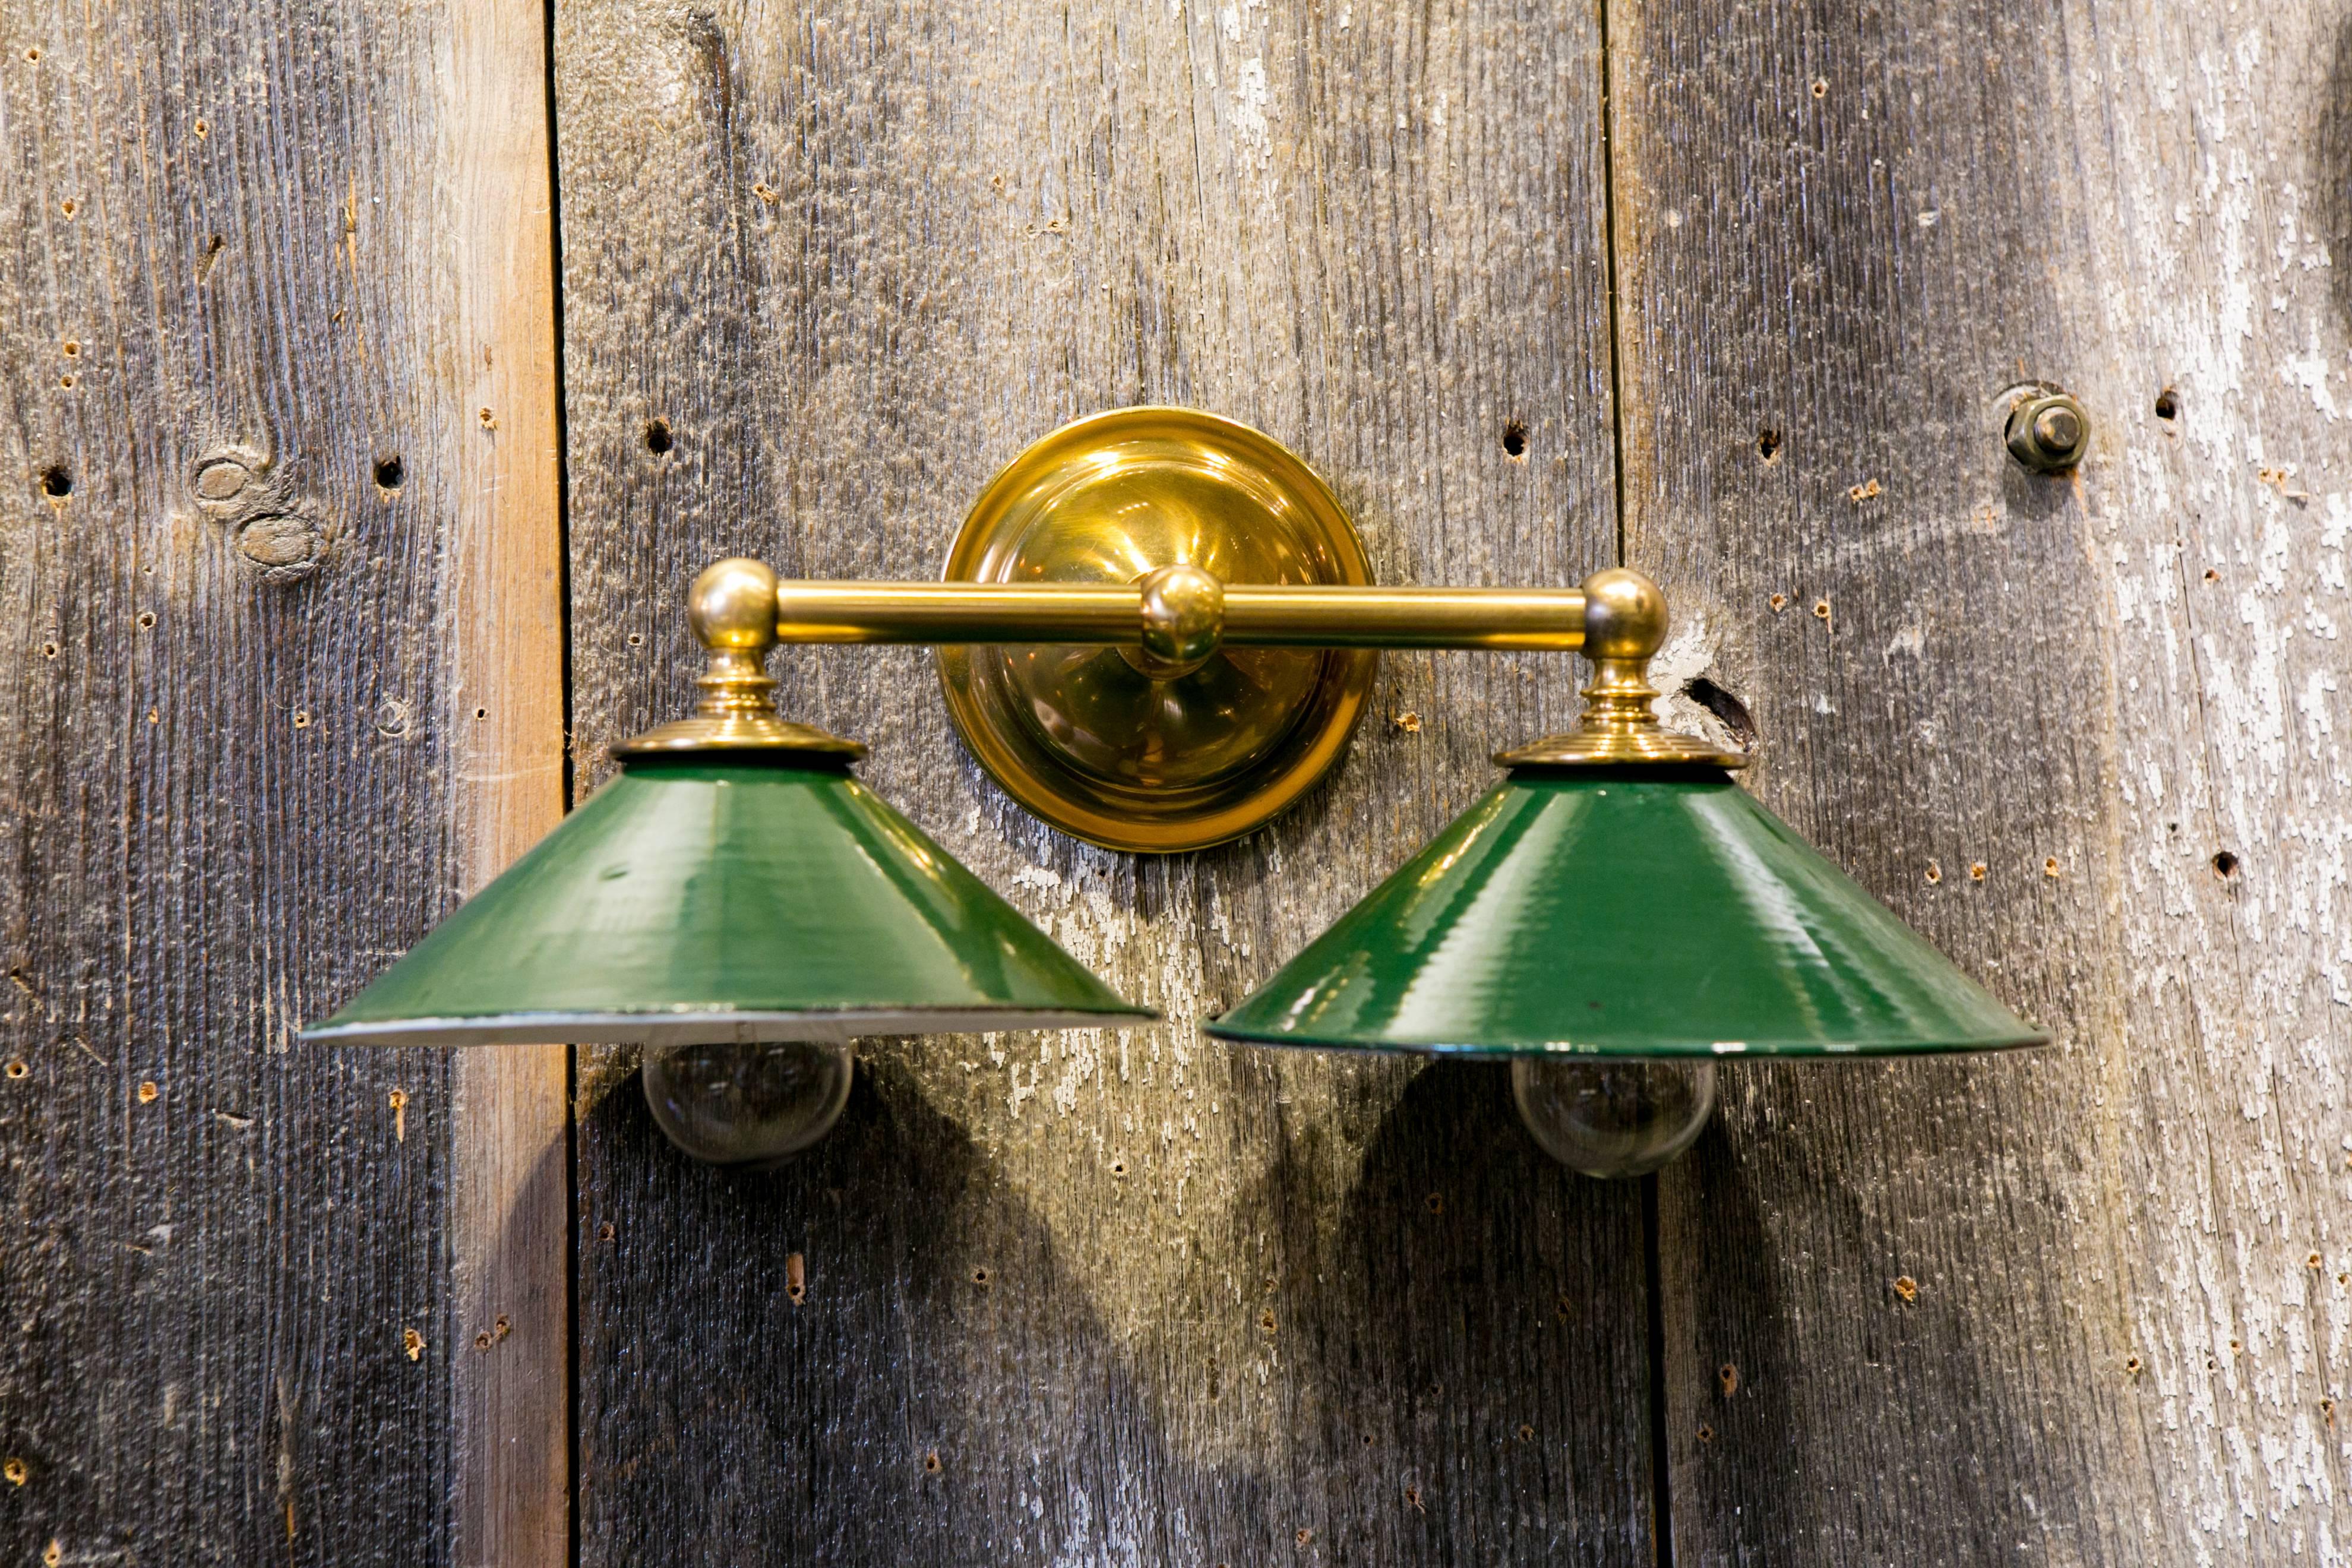 Industrial Brass Wall Sconce with Green Enamel Downward Facing Shades, circa 1920